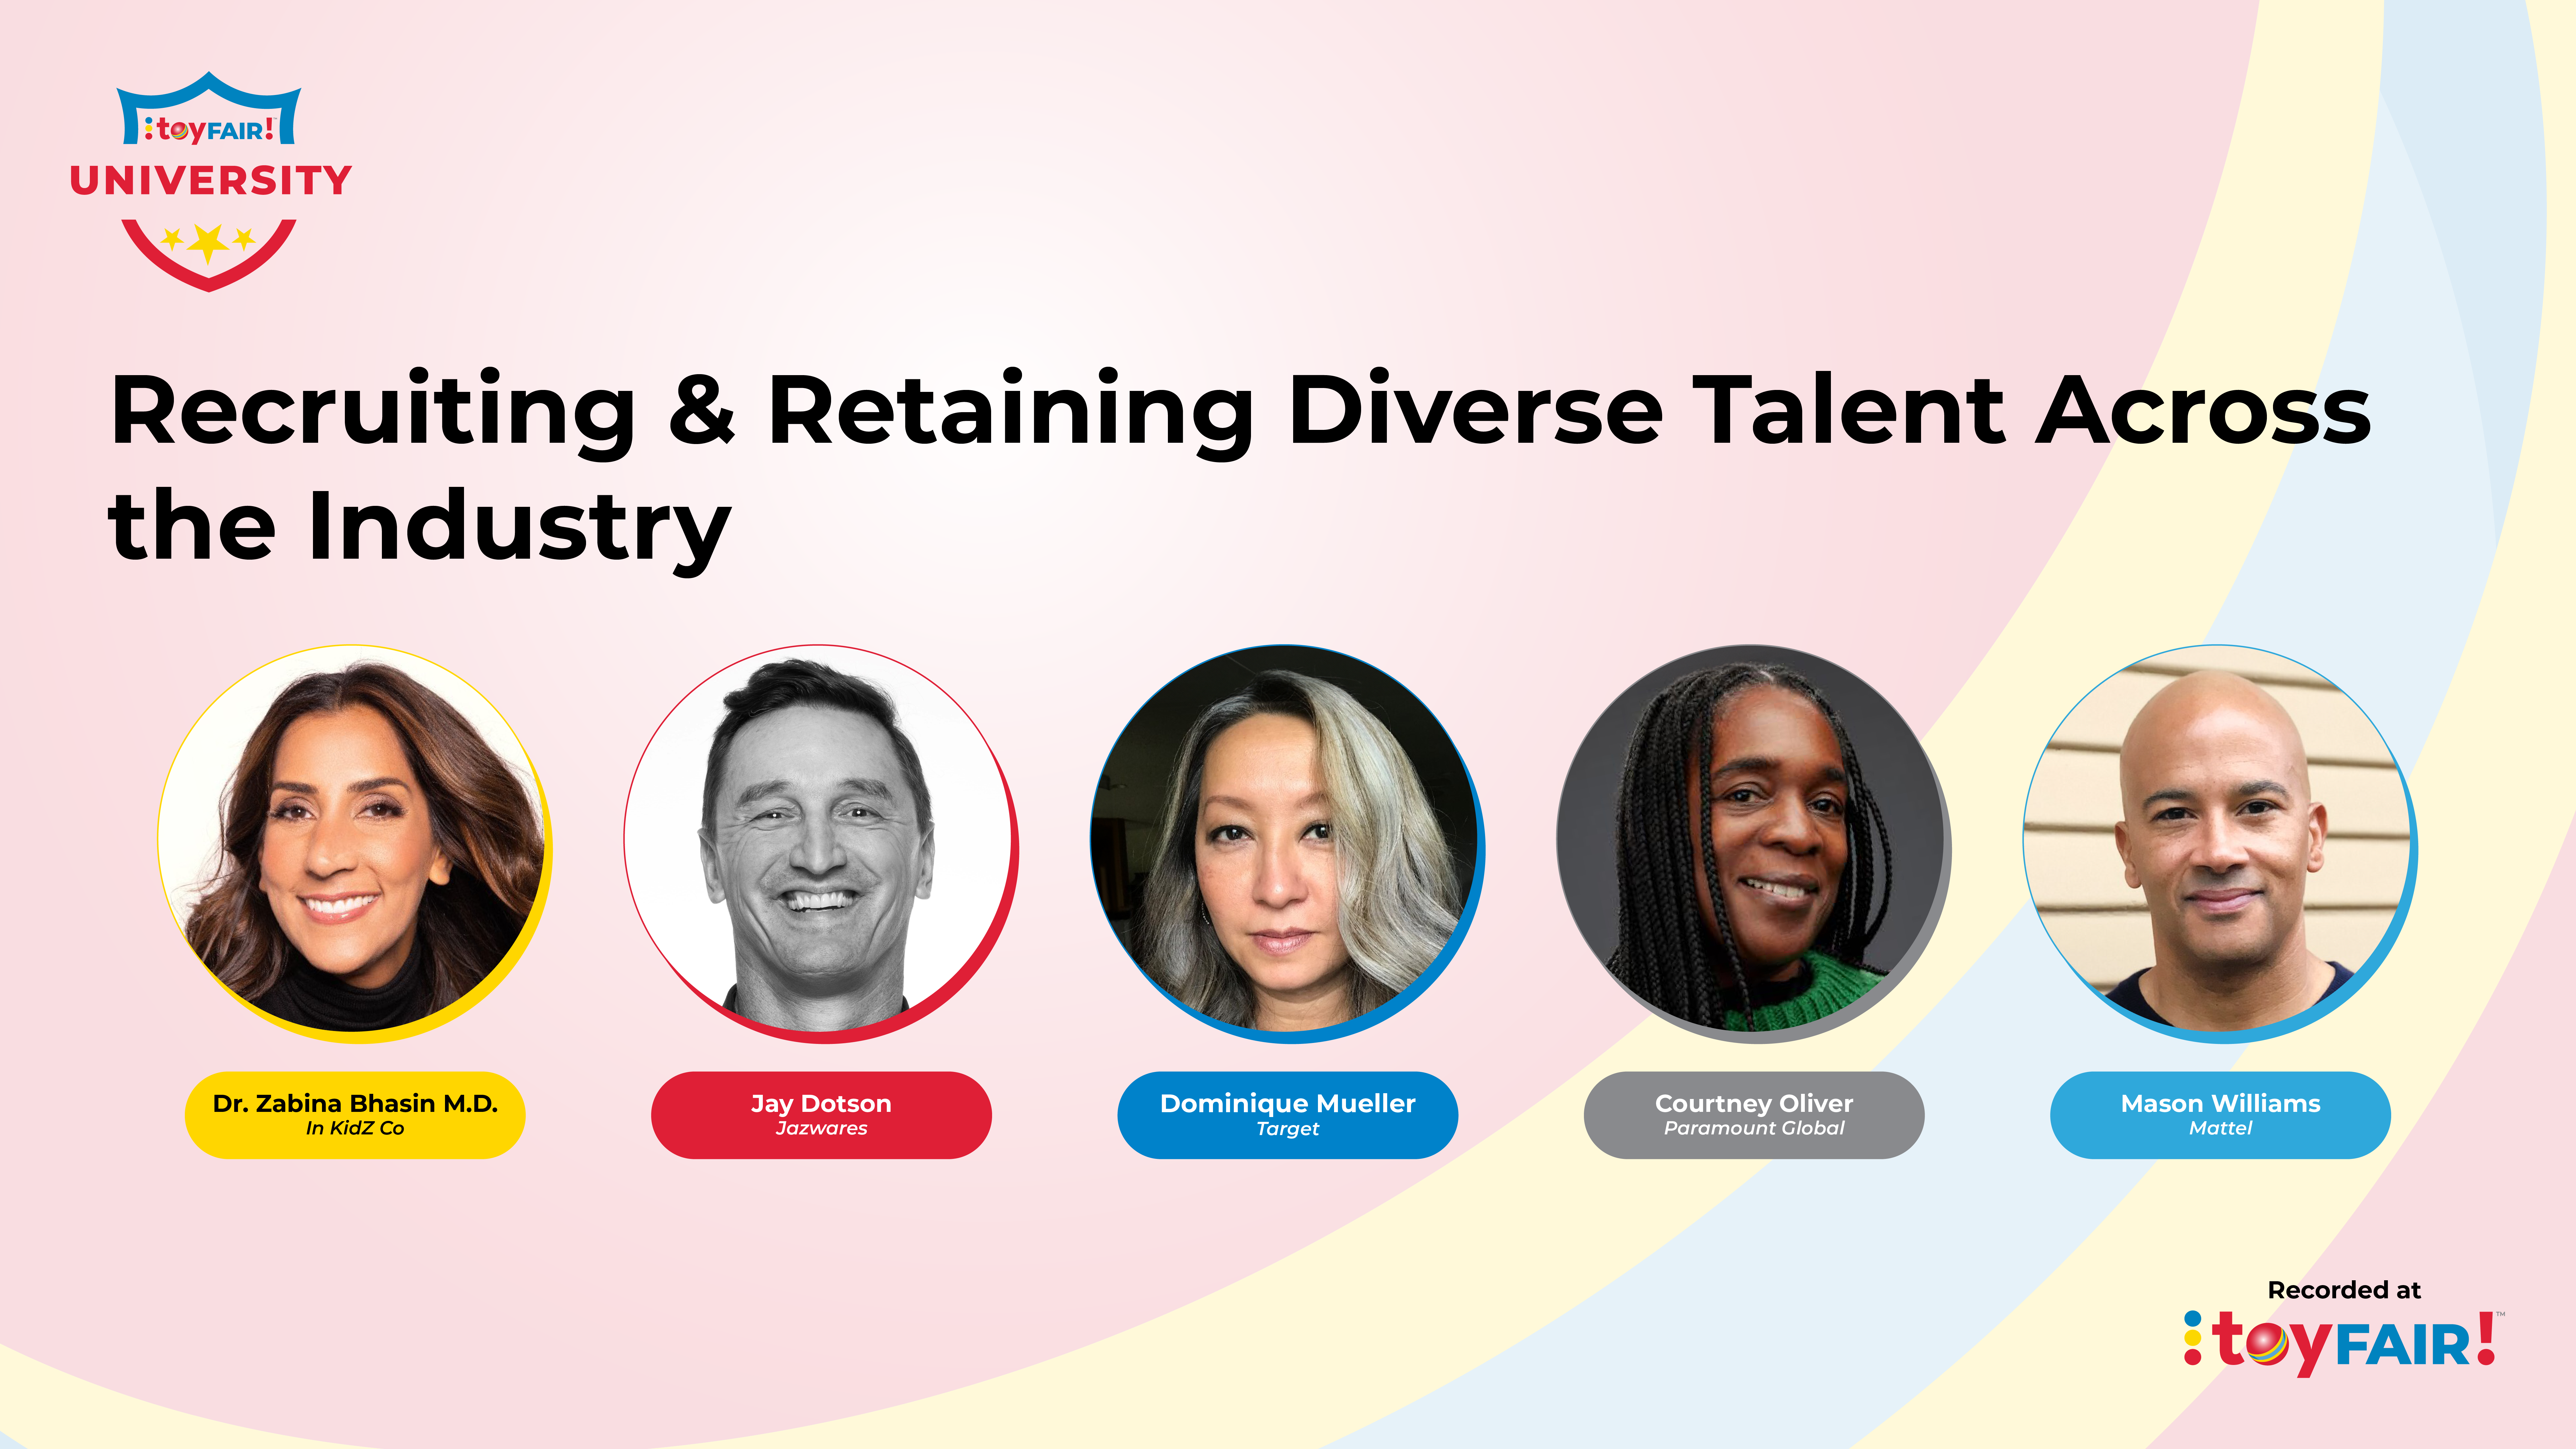 Recruiting & Retaining Diverse Talent Across the Industry